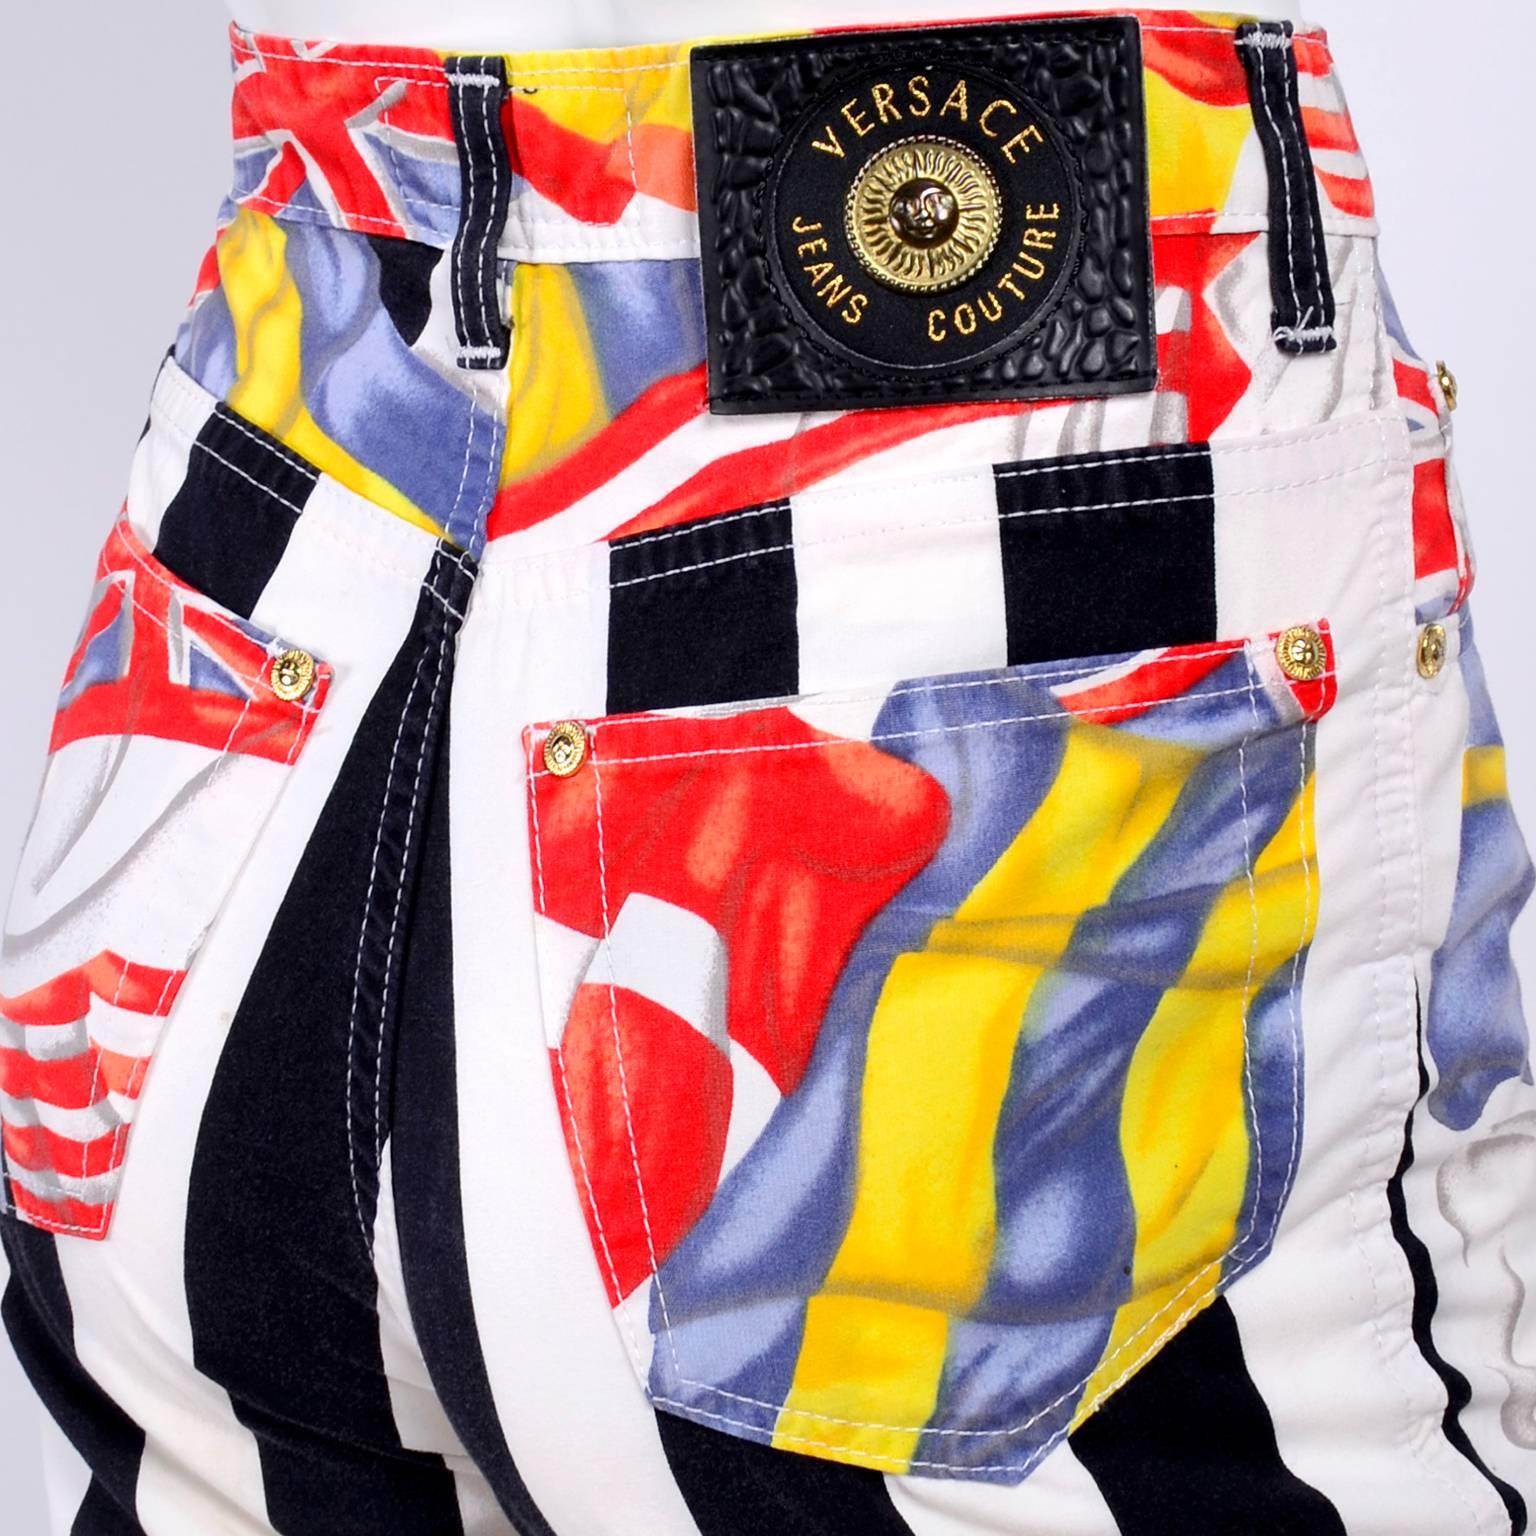 These are very rare Gianni Versace Jeans Couture flag pants from the 1990's. These novelty print jeans have black and white stripes on the back of the legs and flags. We love Versace jeans and these are some of our favorites.  These jeans feature